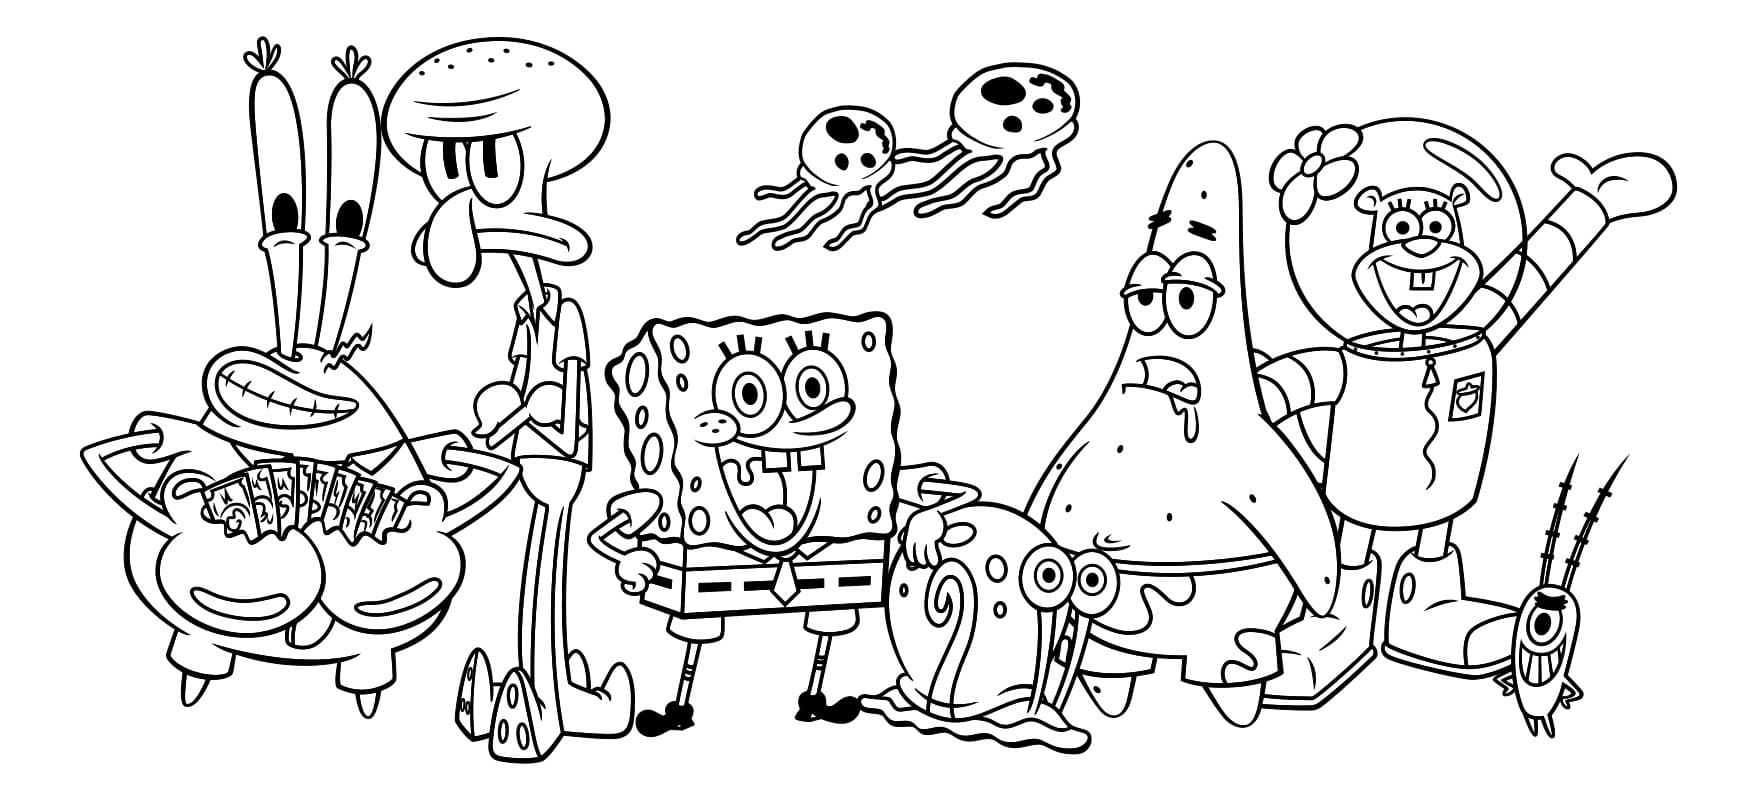 Spongebob Characters Coloring Page